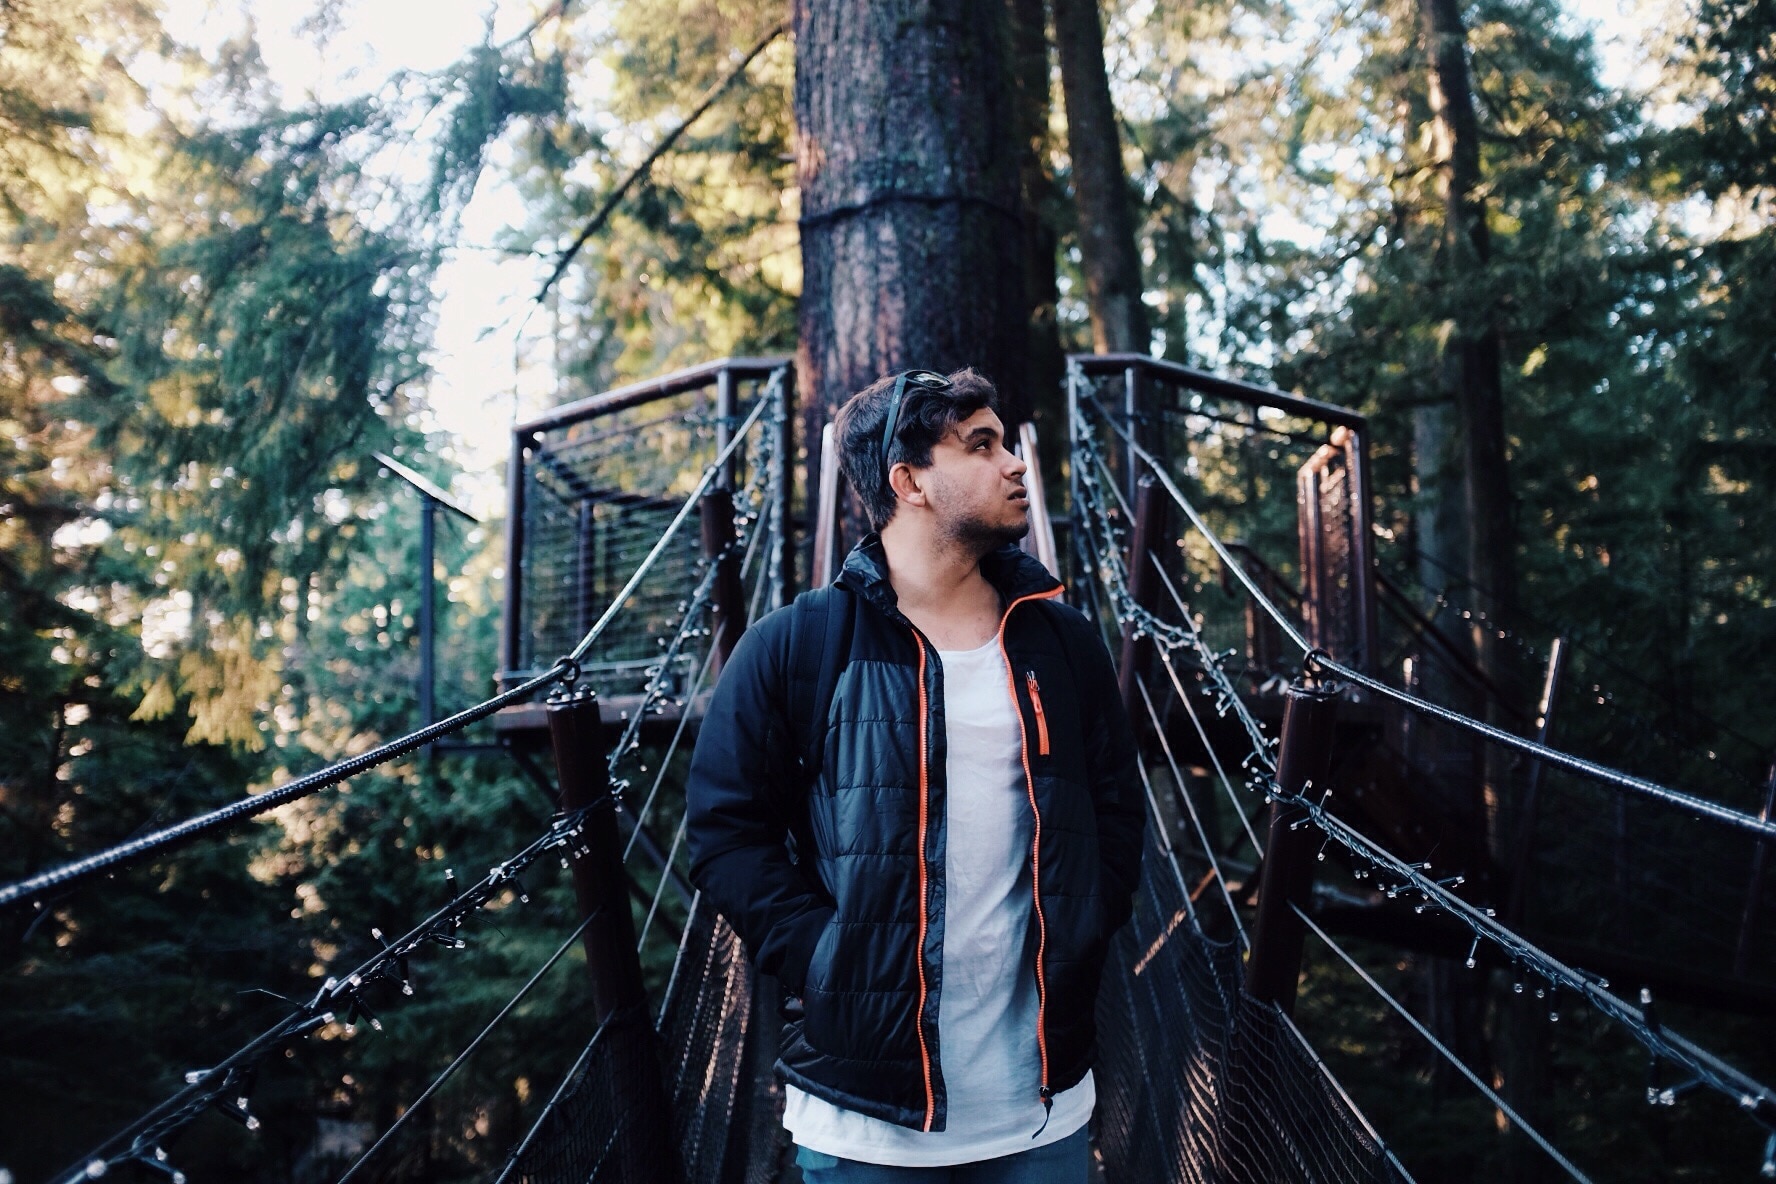 man in black zip-up jacket and white inner shirt on hanging bridge and tree bark view behind